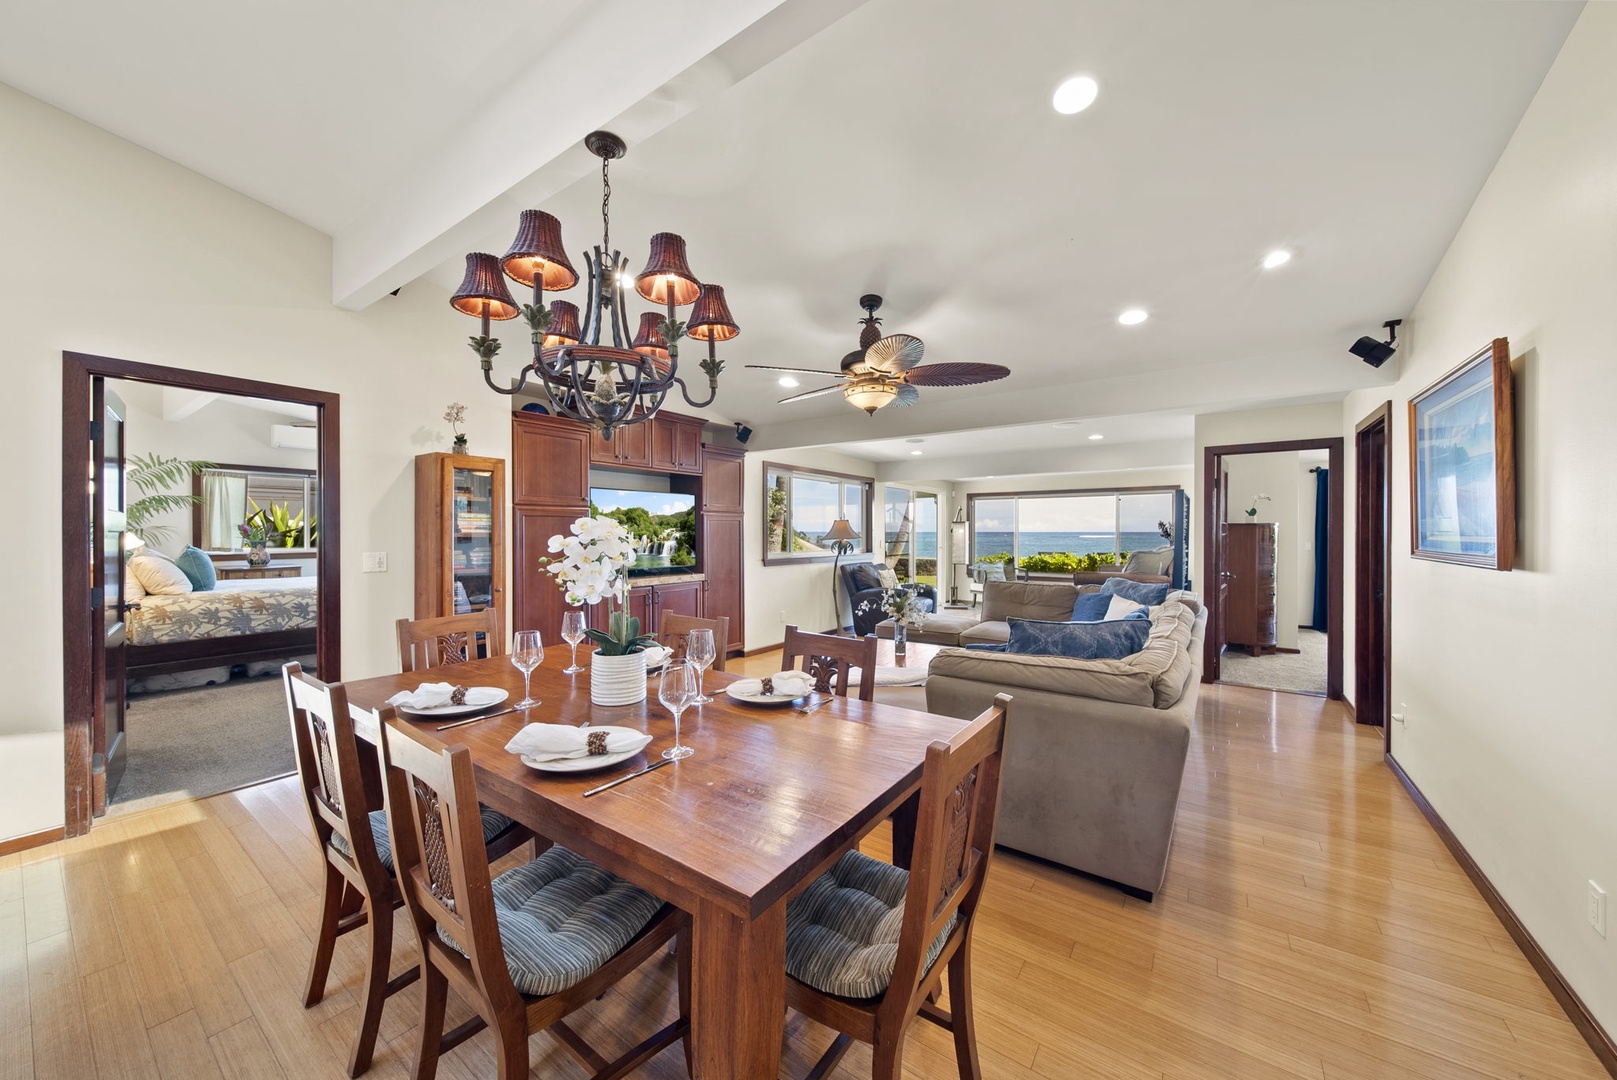 Waialua Vacation Rentals, Hale Oka Nunu - Just past the kitchen, you'll find the formal dining area